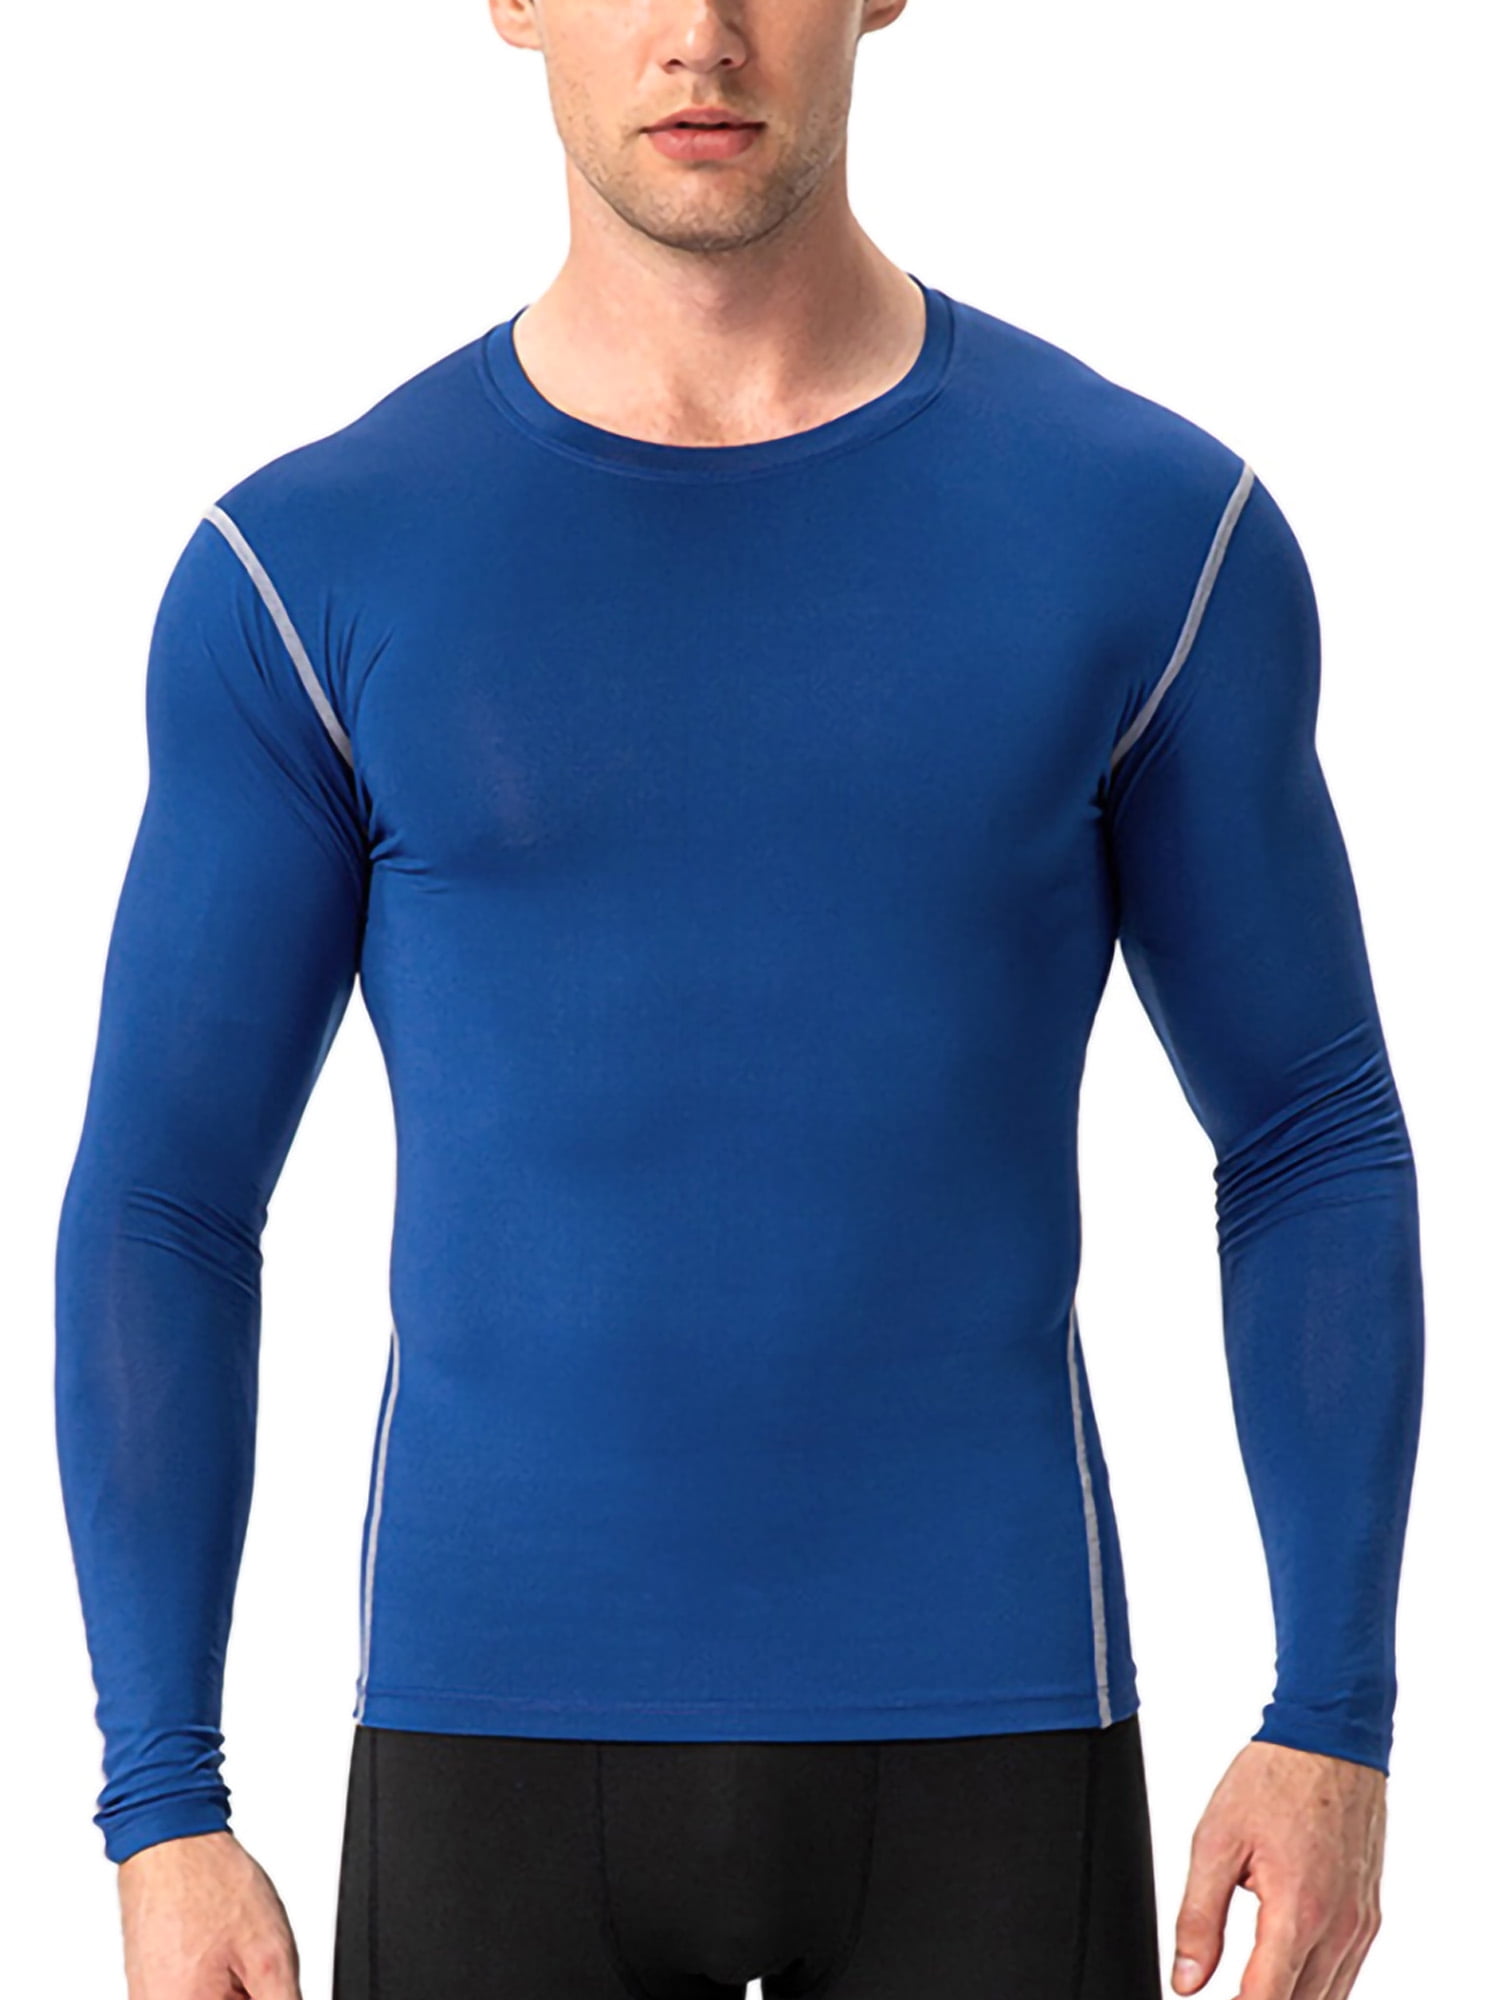 Kamo Fitness Long Sleeve Activewear T-Shirt for Men with Fast Drying and  Moisture Transport – Blue – H&J Liquidators and Closeouts, Inc